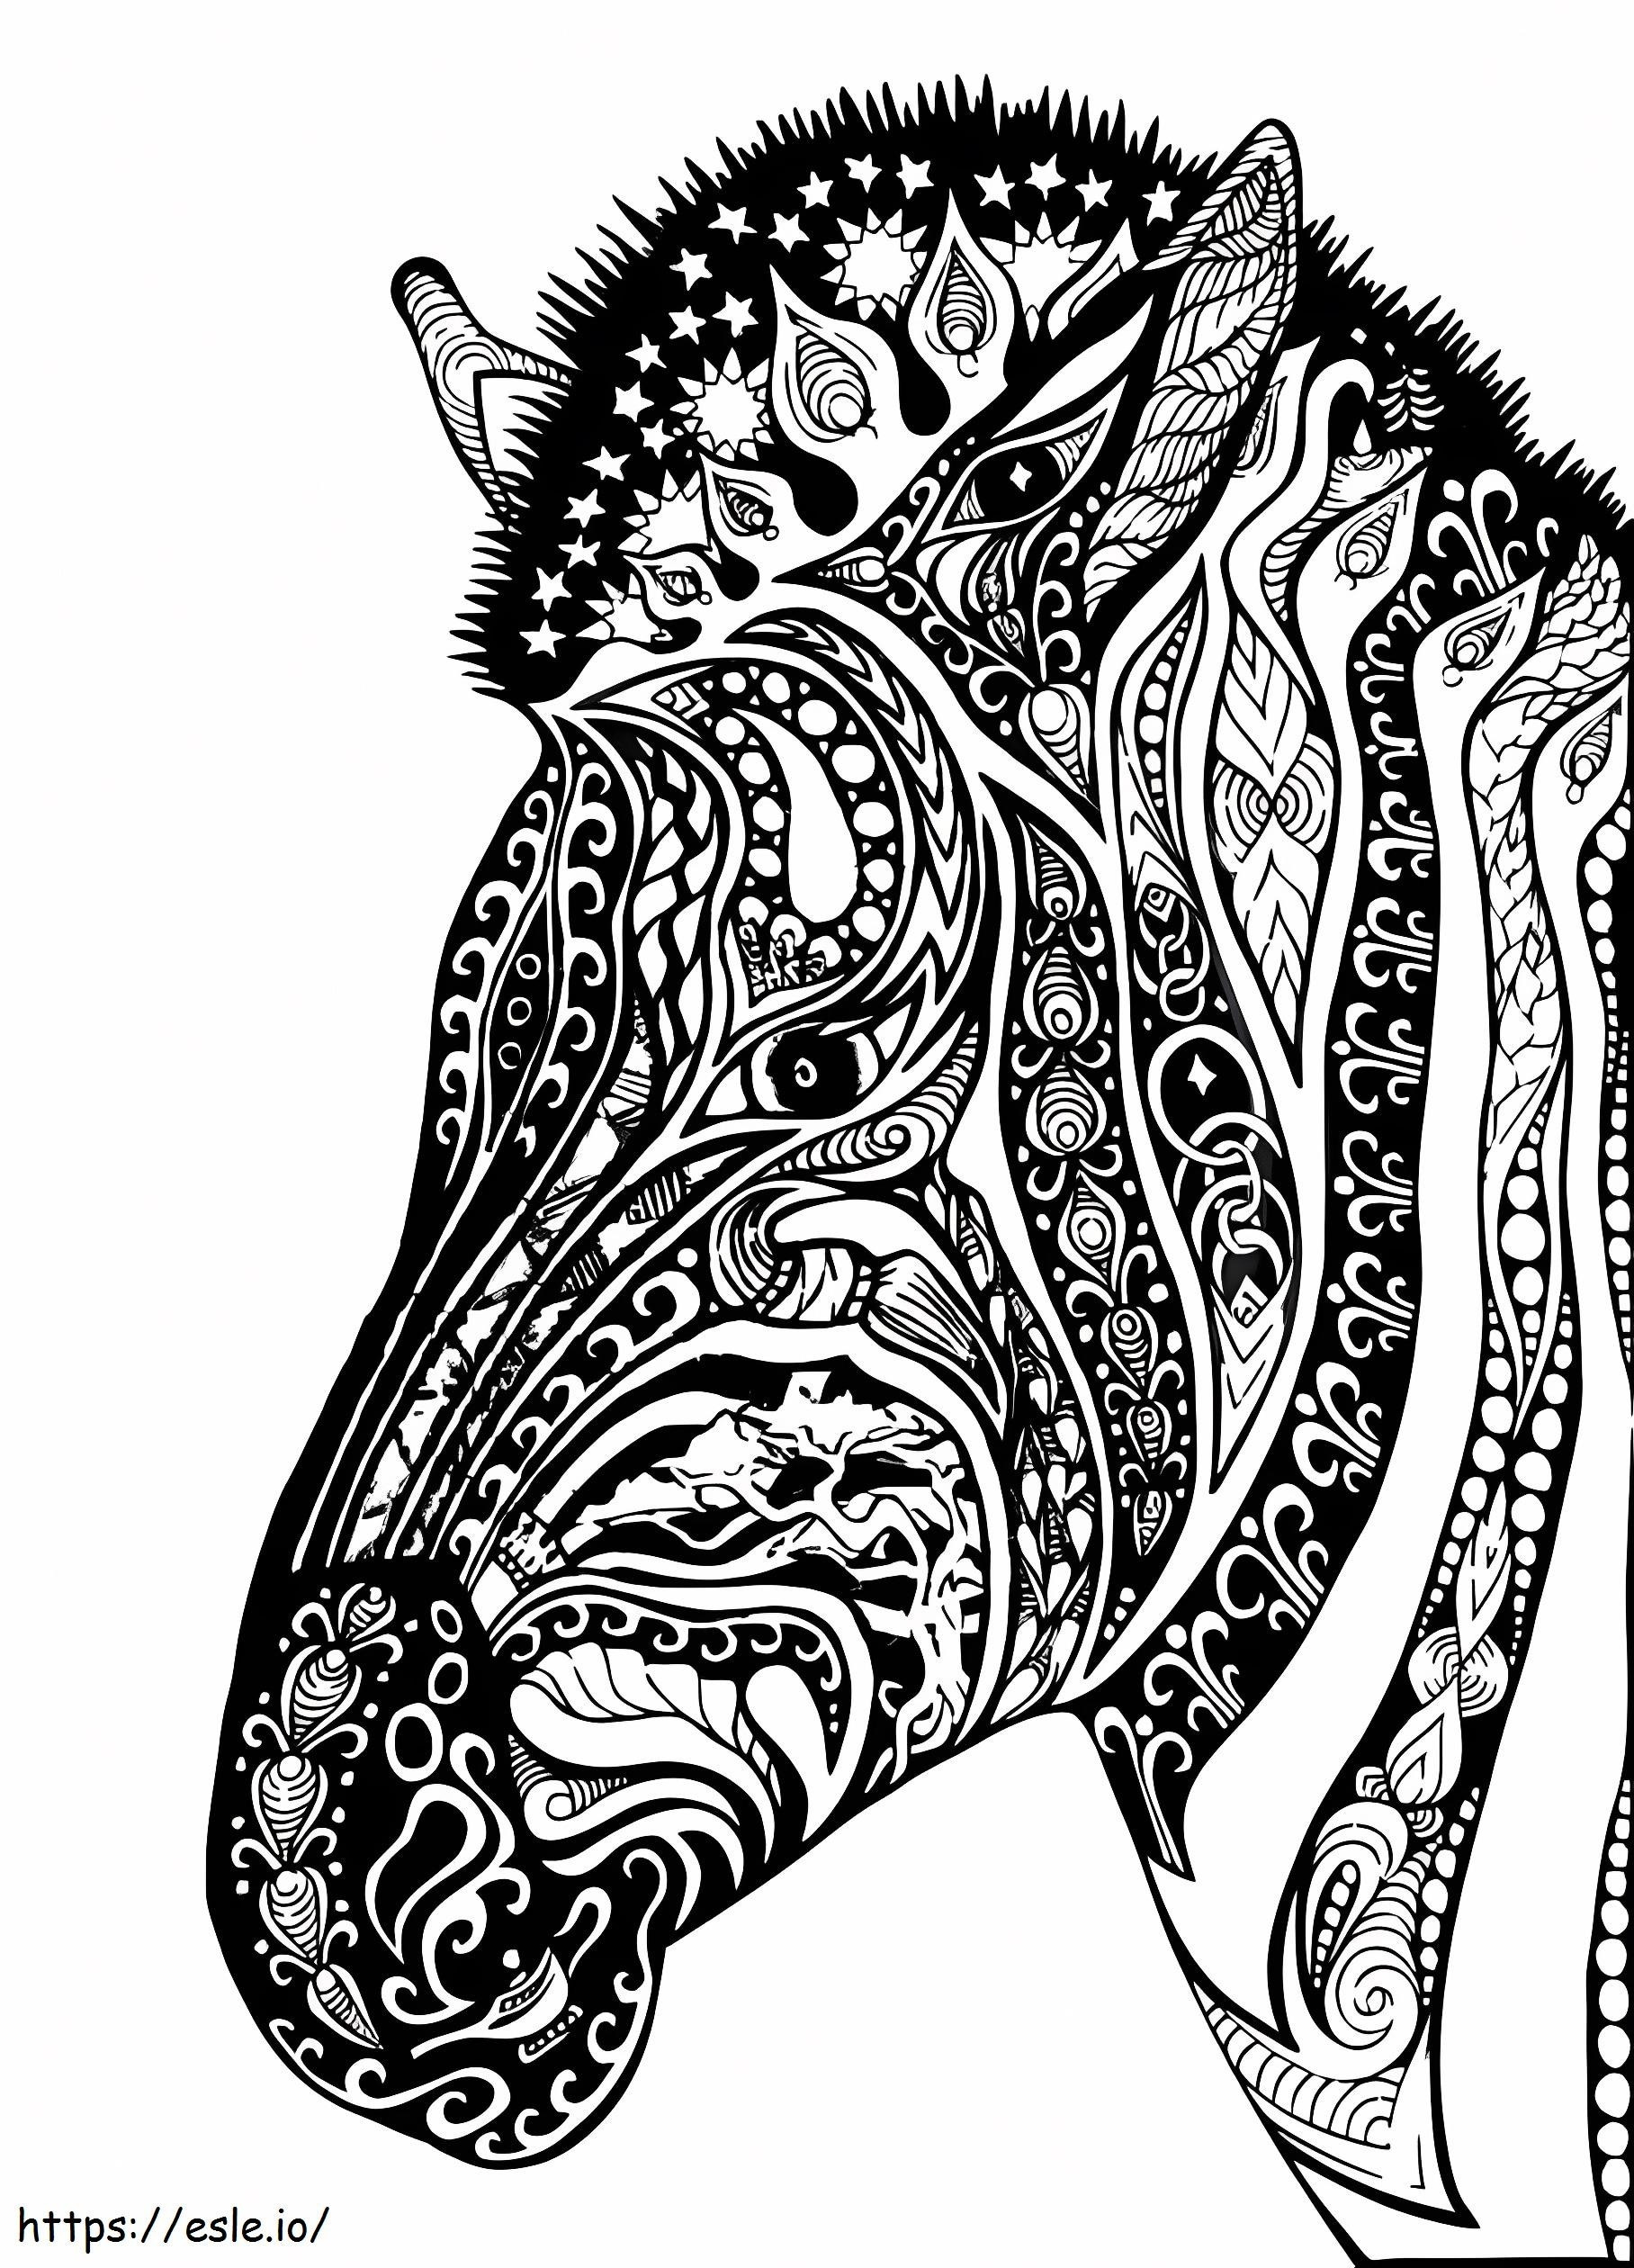 Zebra Stress Relief coloring page